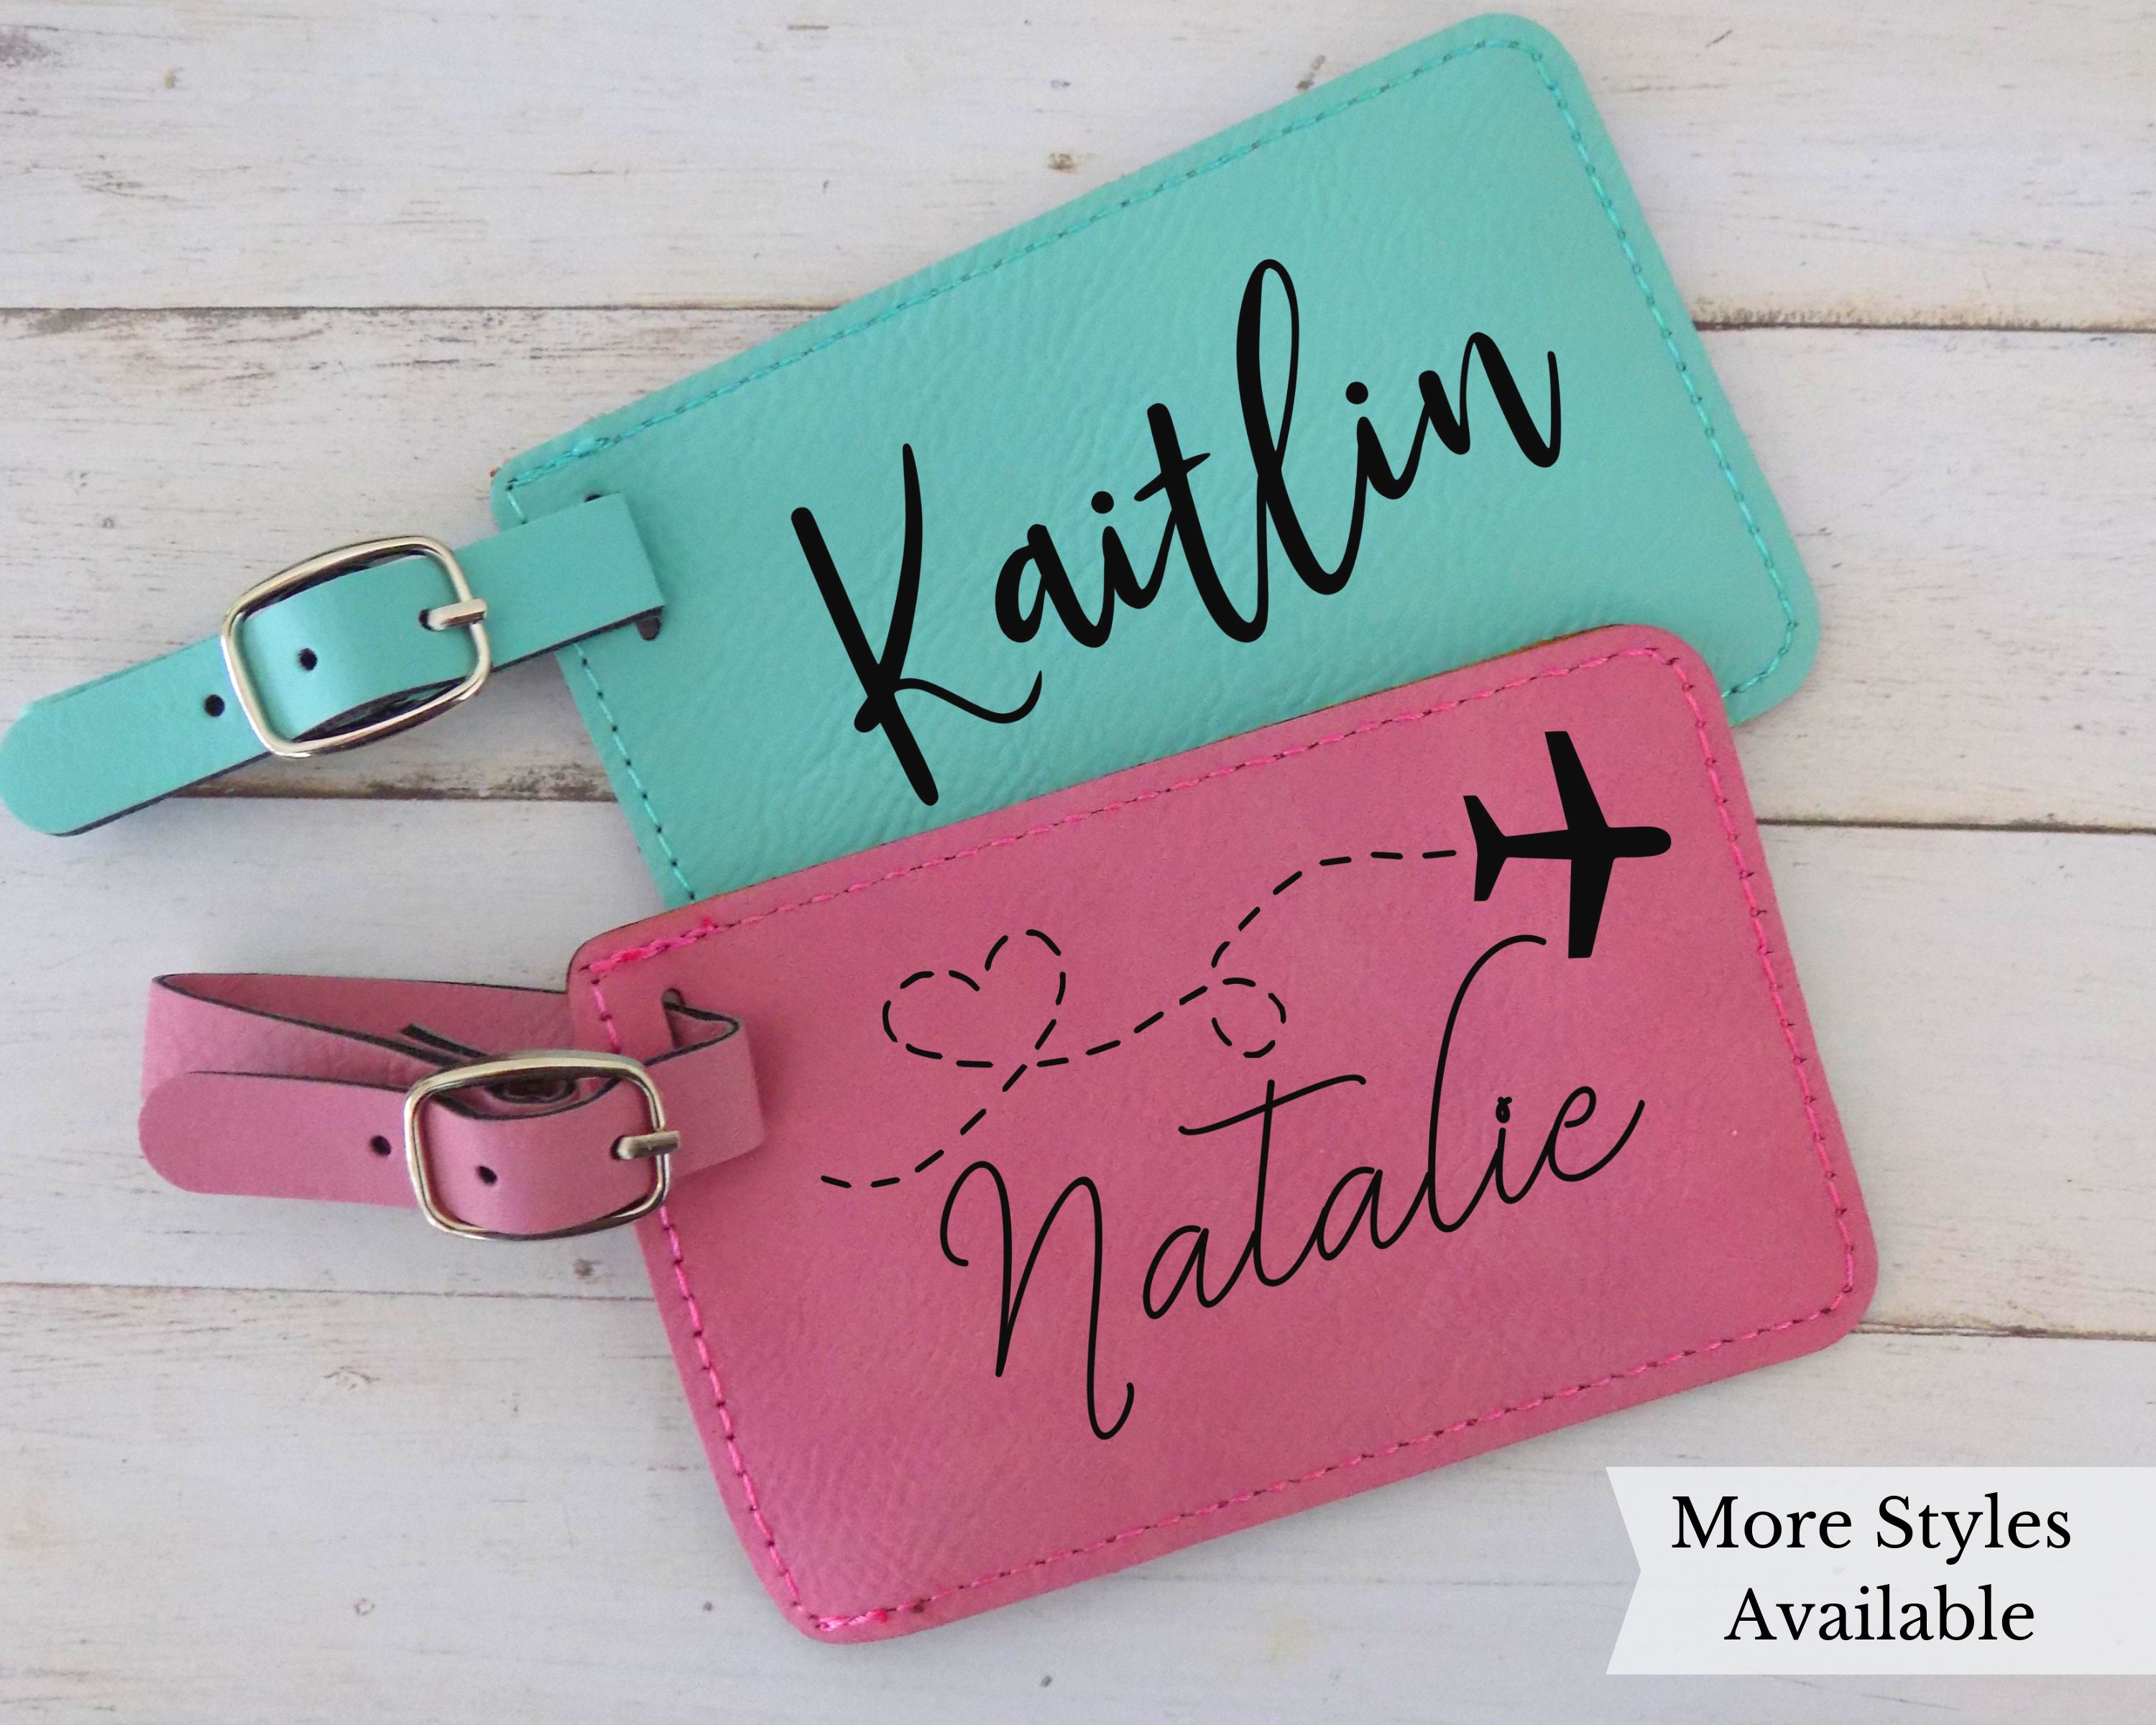 Luggage Tags Personalized Tassen & portemonnees Bagage & Reizen Bagagelabels Luggage Tags Personalized Luggage Tag Leather Travel Accessories Engraved Luggage Tag Custom Luggage Tag 